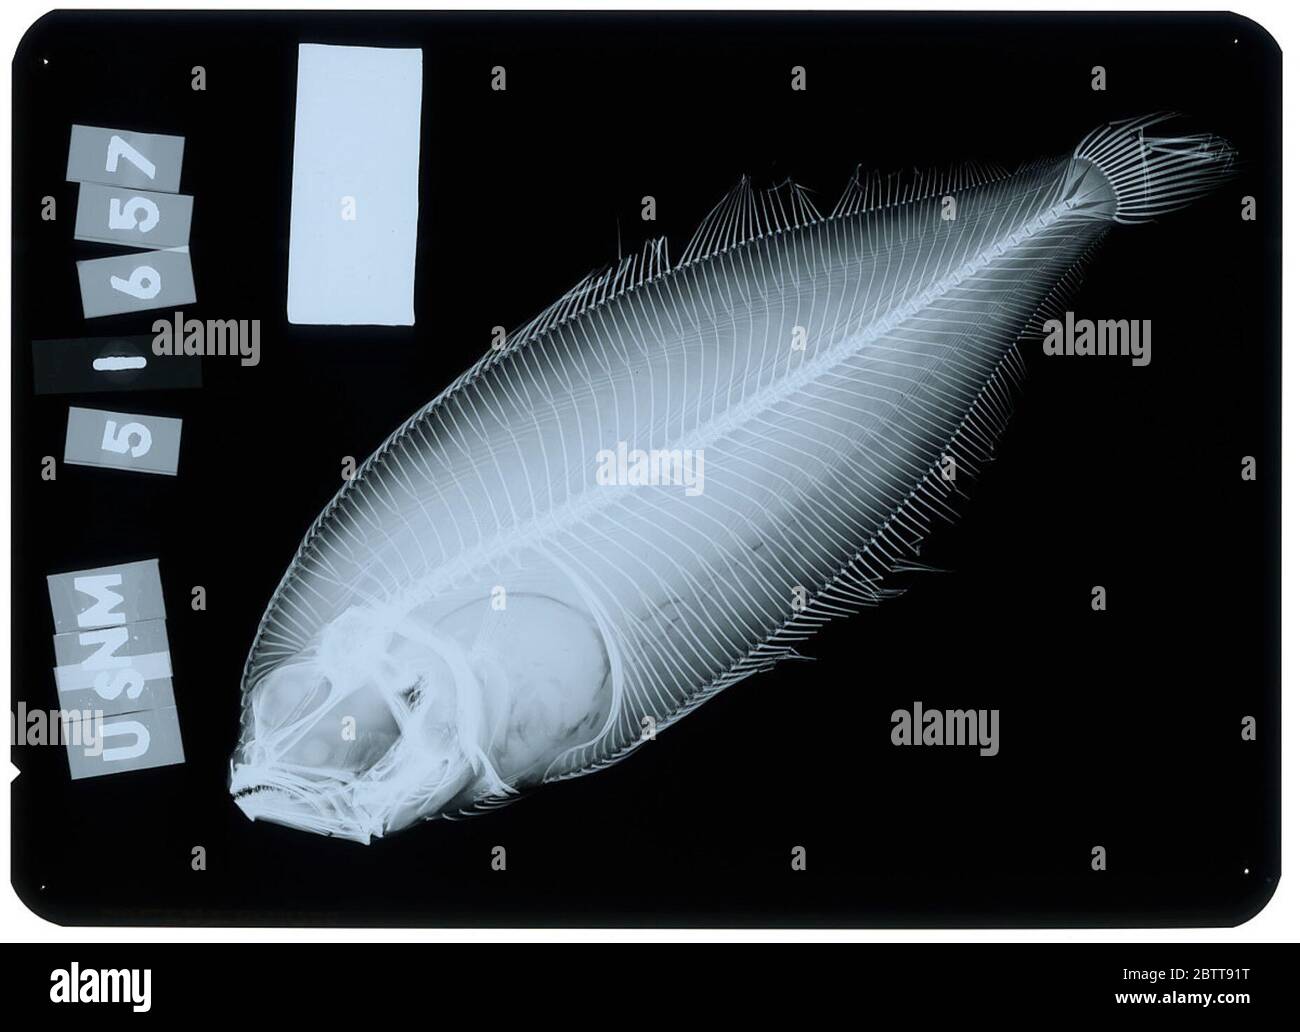 Anticitharus debilis Gilbert. Radiograph is of a holotype; The Smithsonian NMNH Division of Fishes uses the convention of maintaining the original species name for type specimens designated at the time of description. The currently accepted name for this species is Arnoglossus debilis.29 Oct 2018D. 41031 Stock Photo